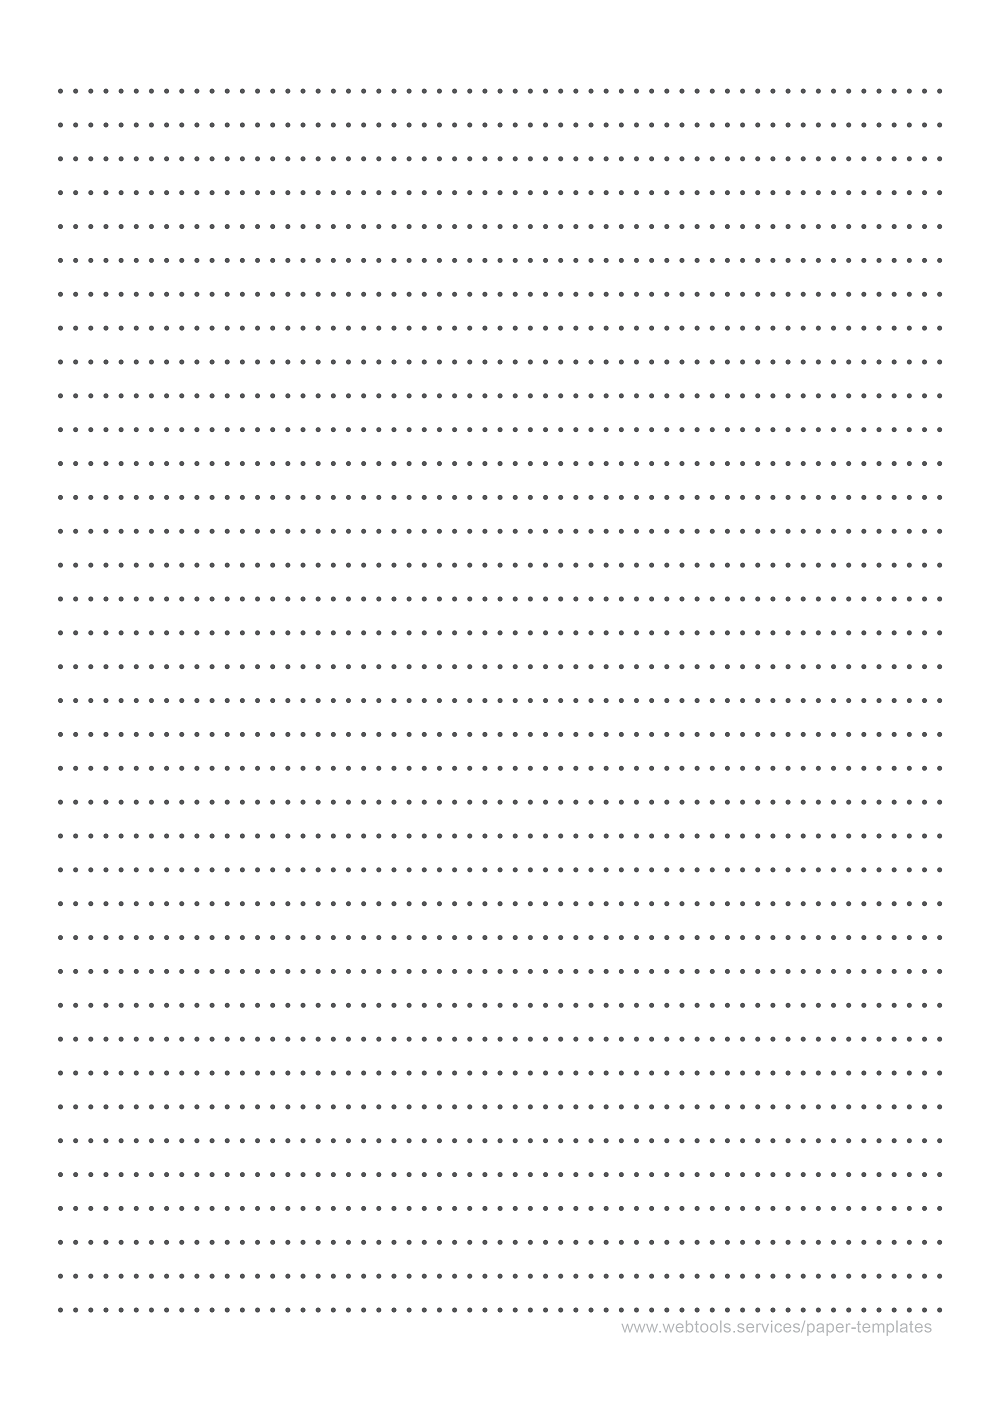 Black Dotted Line Writing Paper Template With 7_1mm Line Height